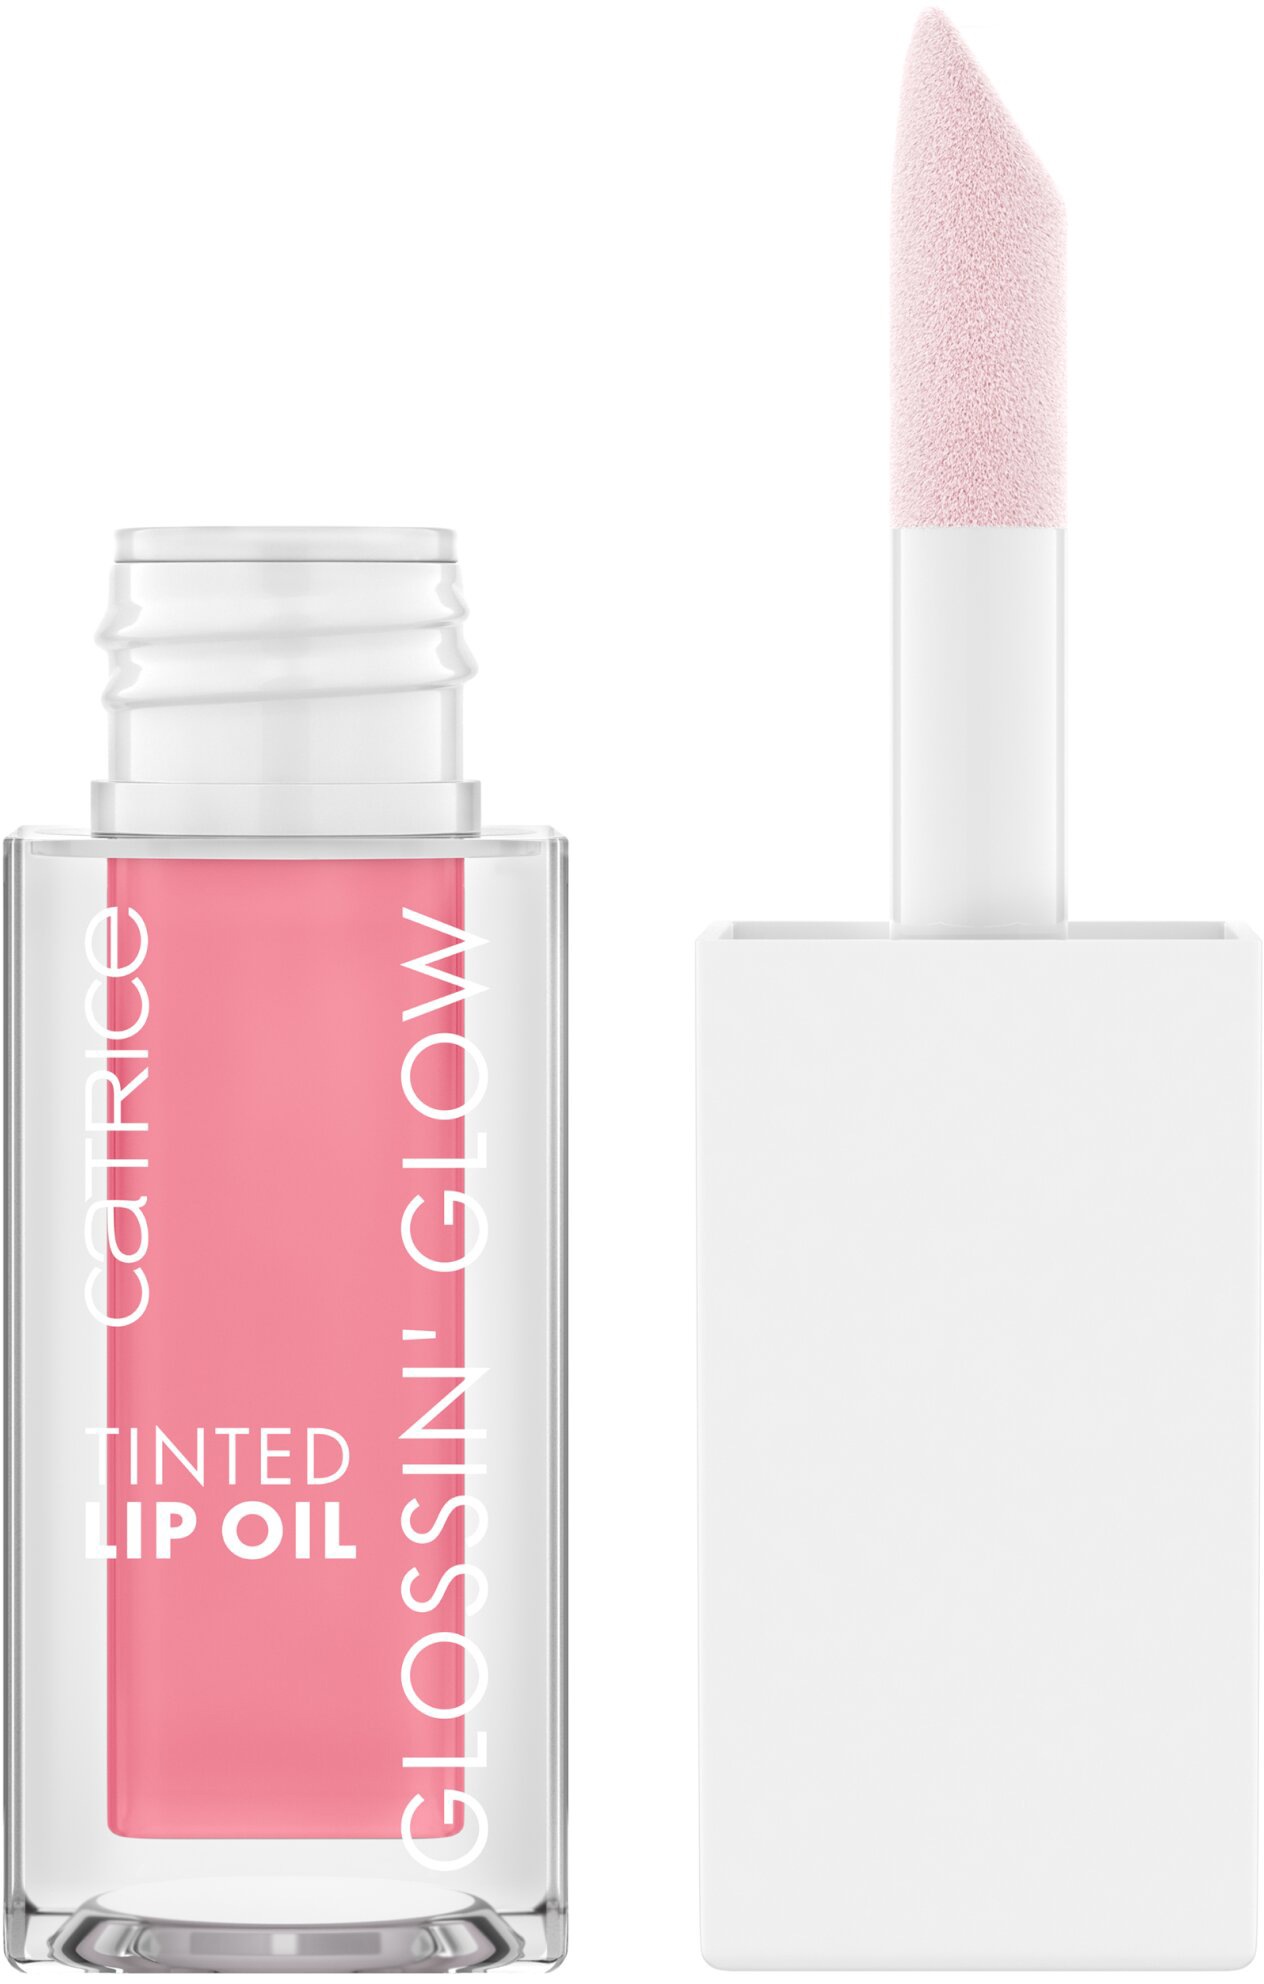 Catrice Lipgloss »Glossin' Glow Tinted Lip Oil...